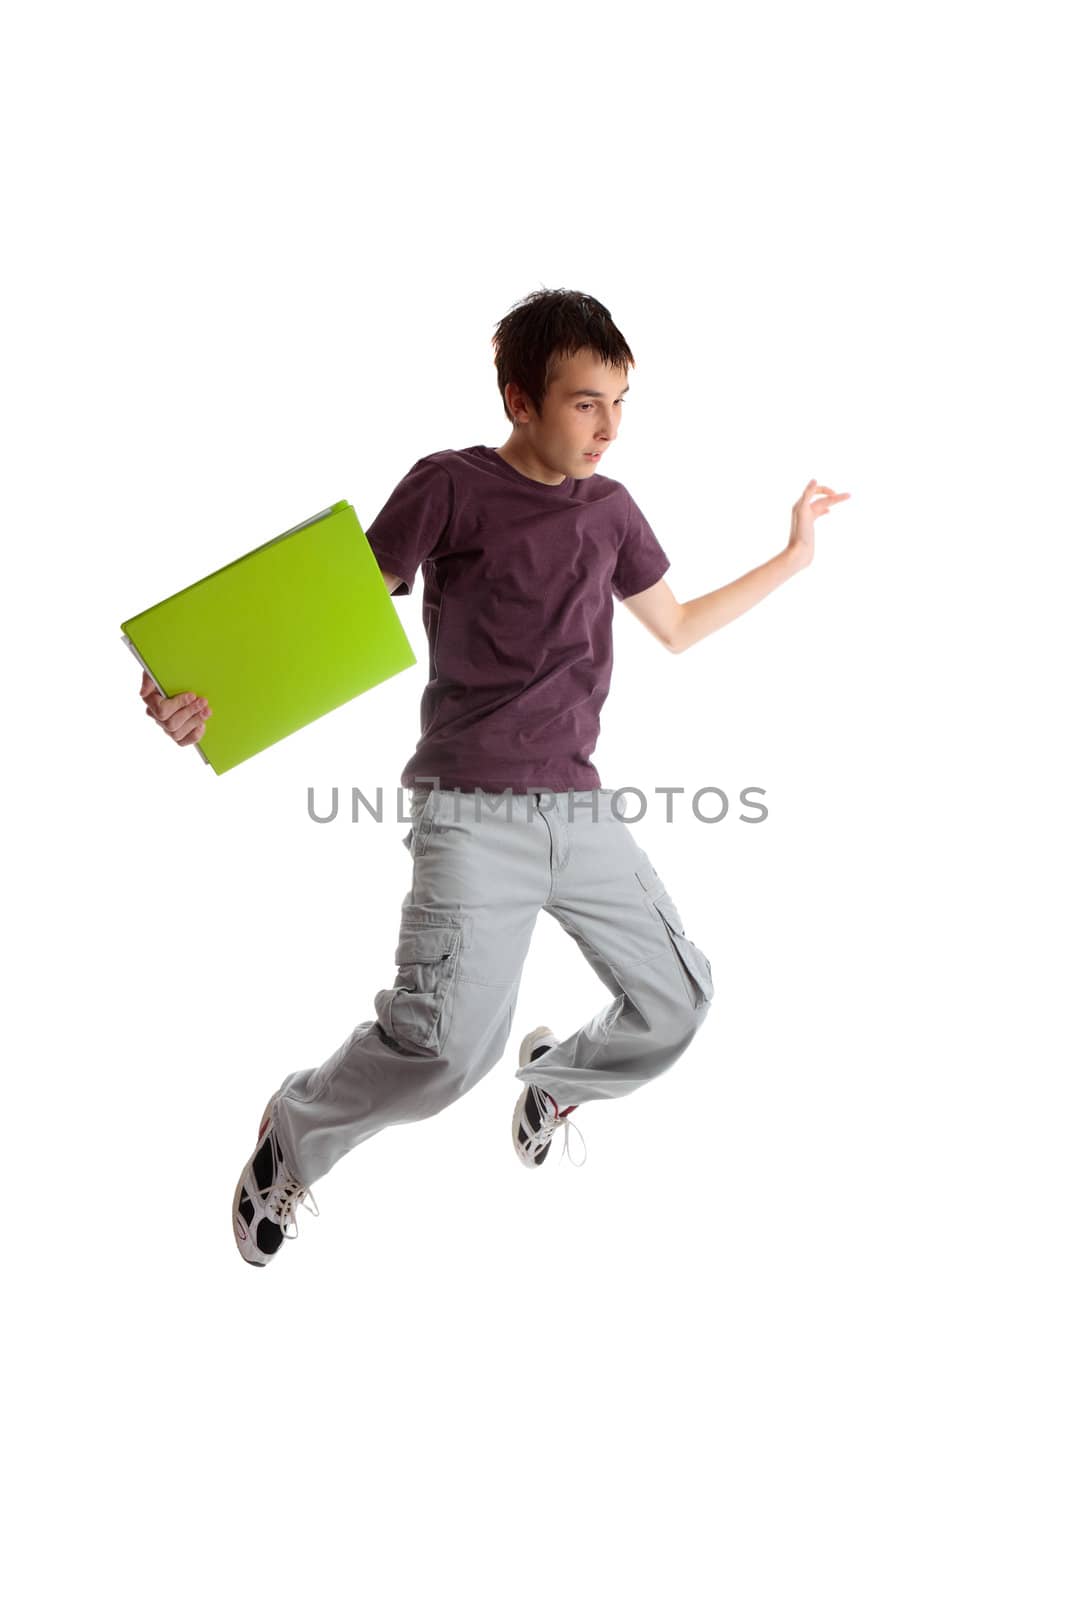 Excited male student jumping leaping high into the air.  White background.